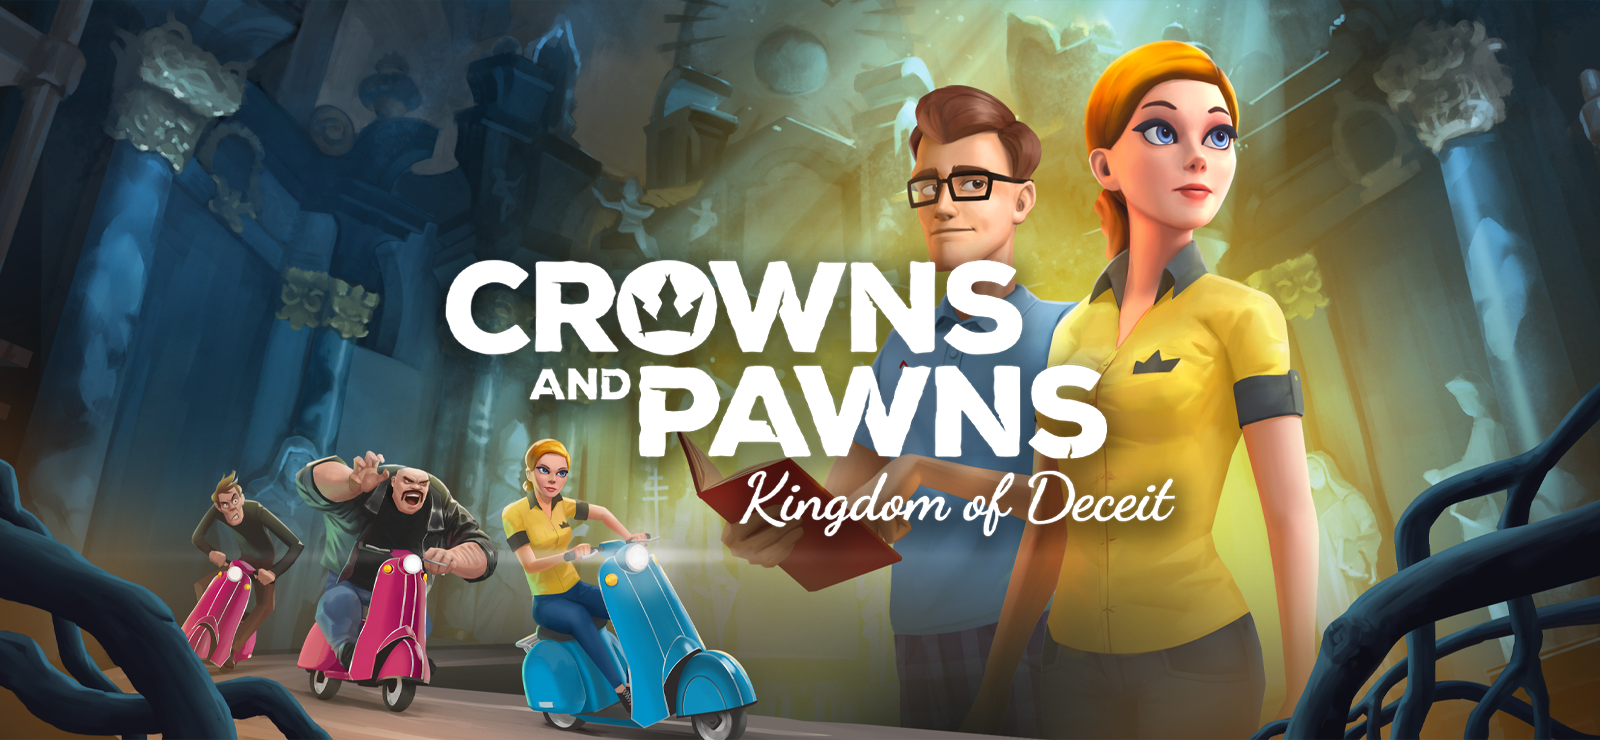 Crowns And Pawns: Kingdom Of Deceit